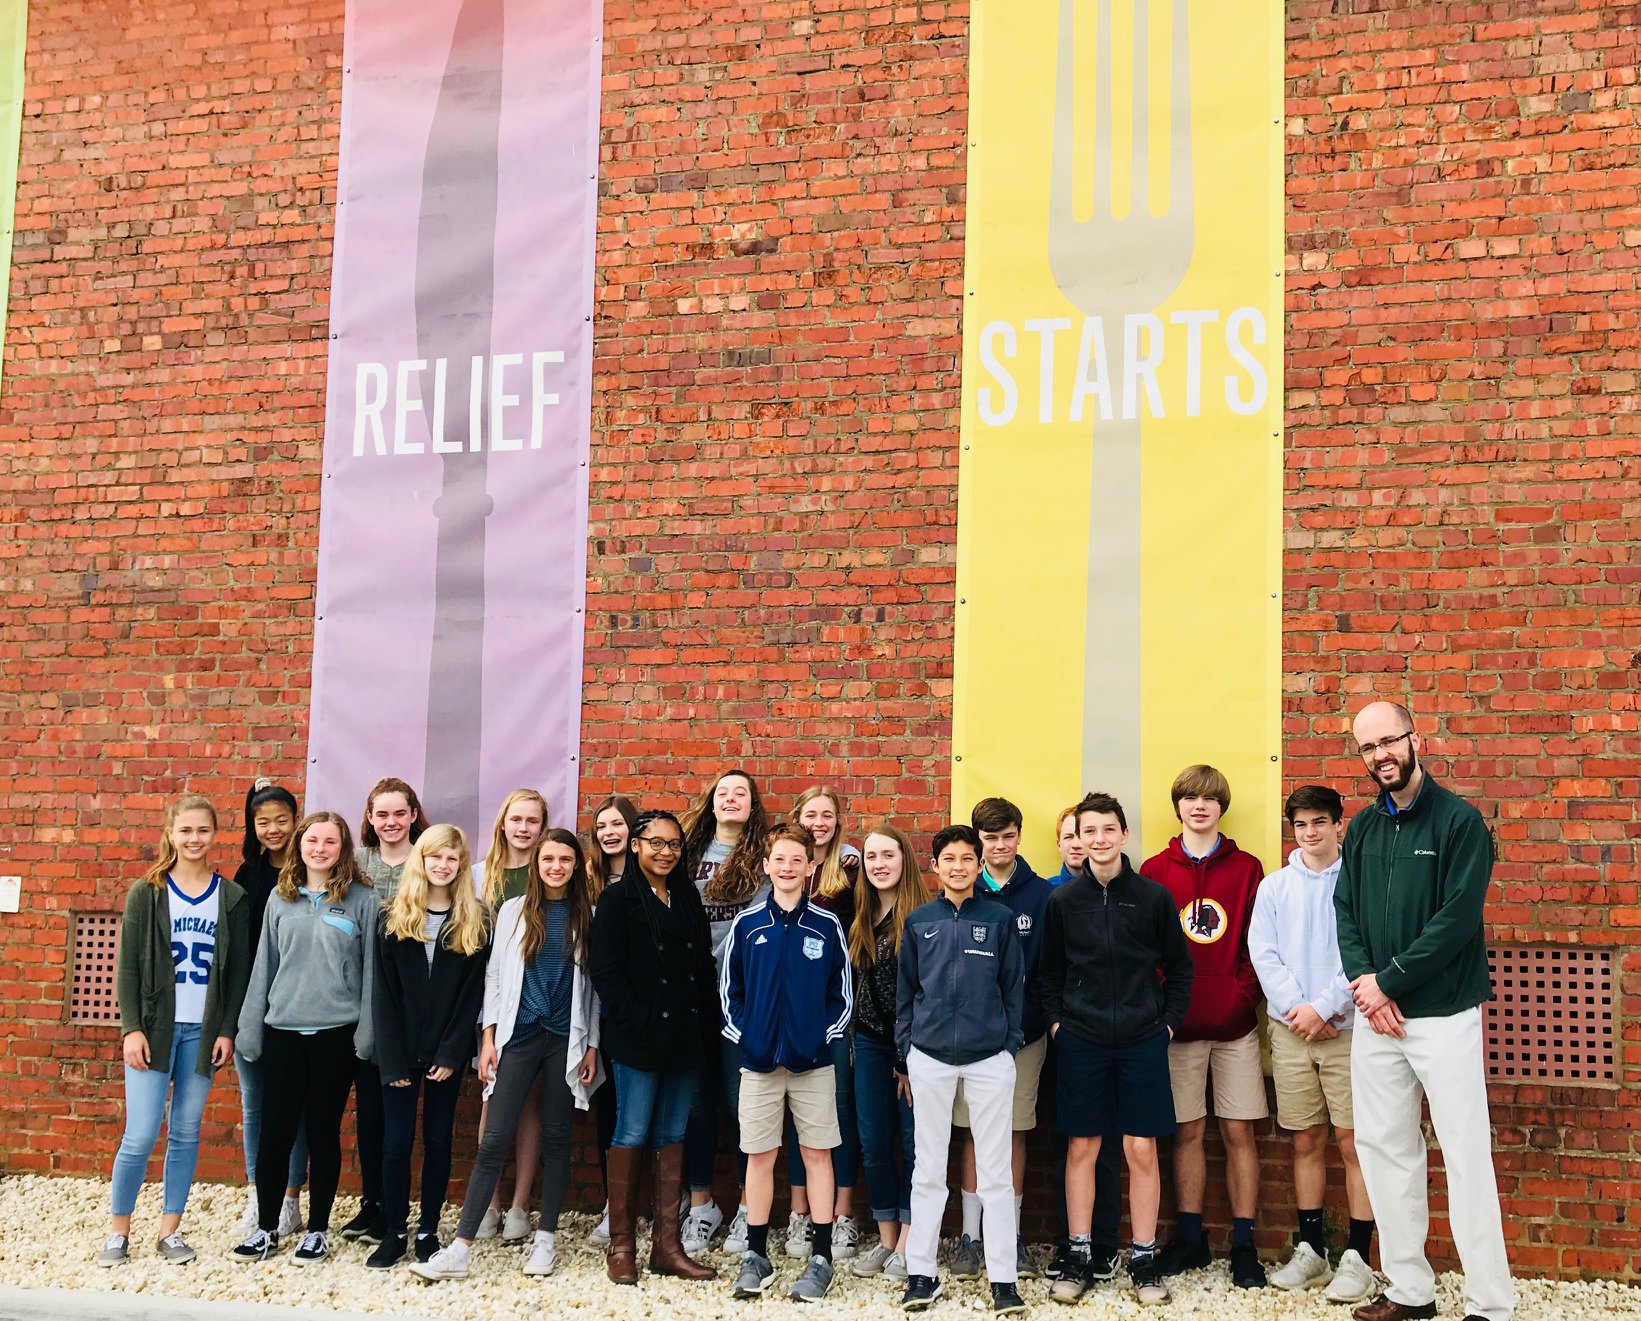 Each semester, our Middle Schoolers volunteer at FeedMore and deliver meals for Meals on Wheels as part of a long partnership between this organization and St. Michael's.